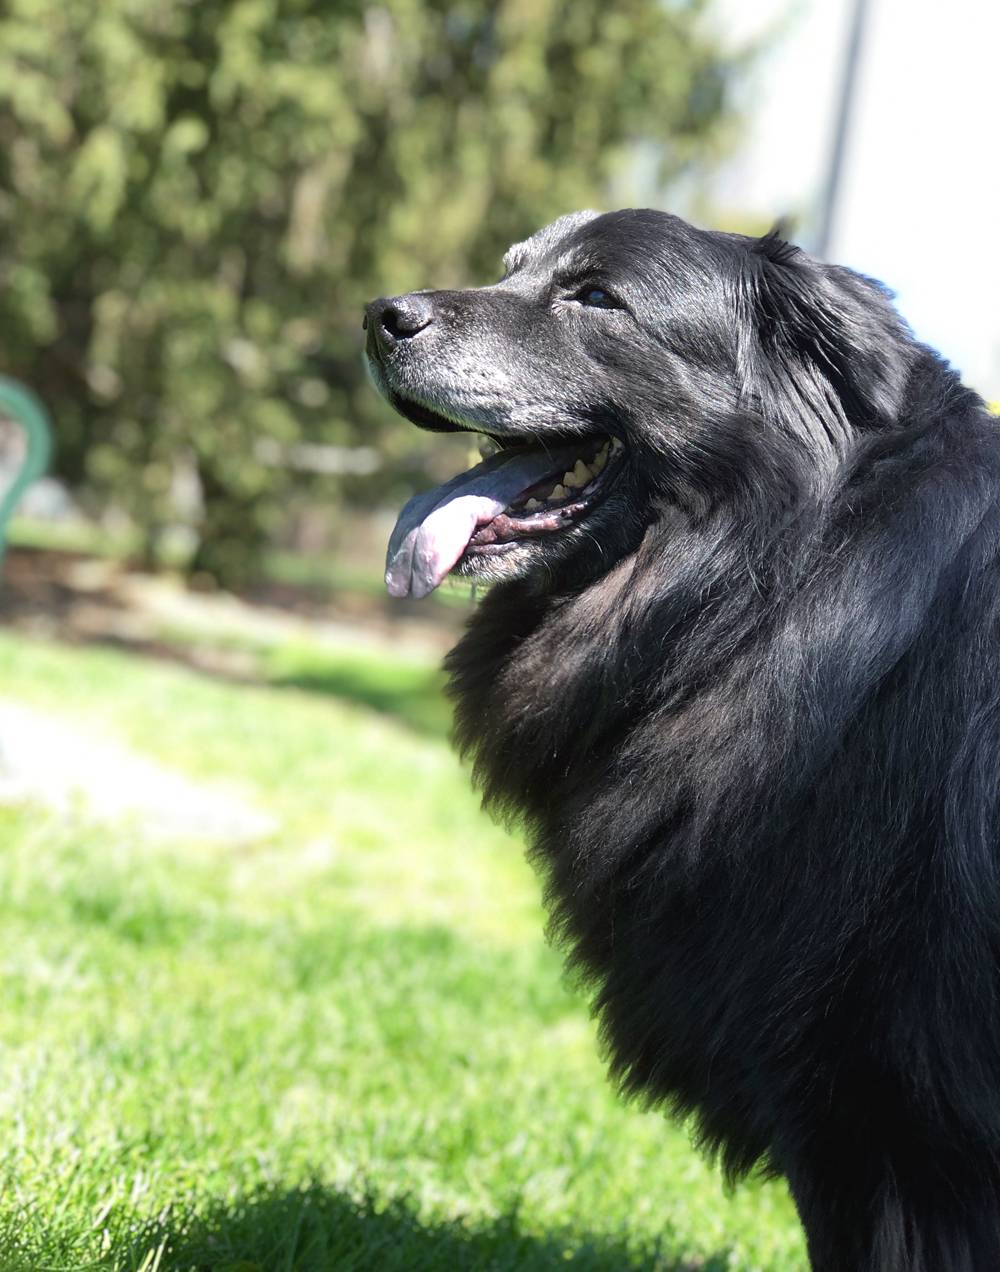 A fluffy black dog with a gray maw and floppy ears stands in a park with very green grass. The dog's mouth is open and its tongue is black and pink. Photo by Jessica Hammie. 